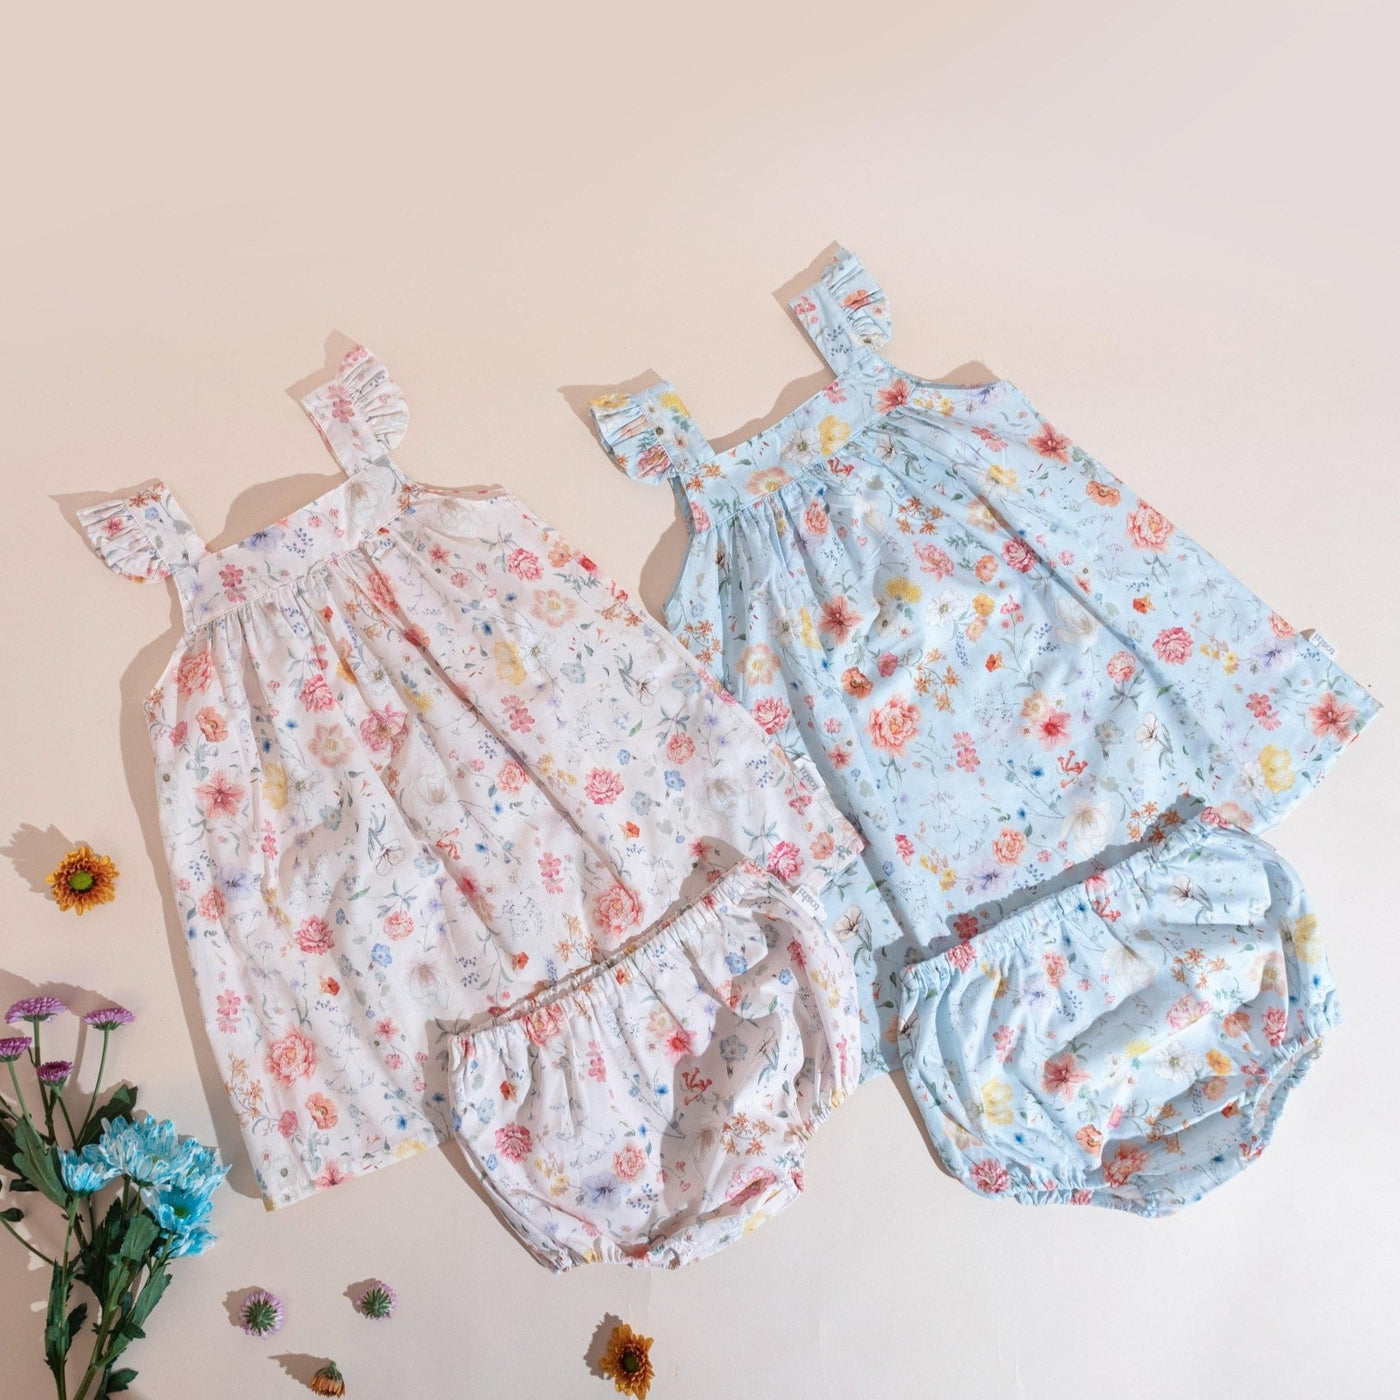 baby girls dress in floral print, with matching bloomers